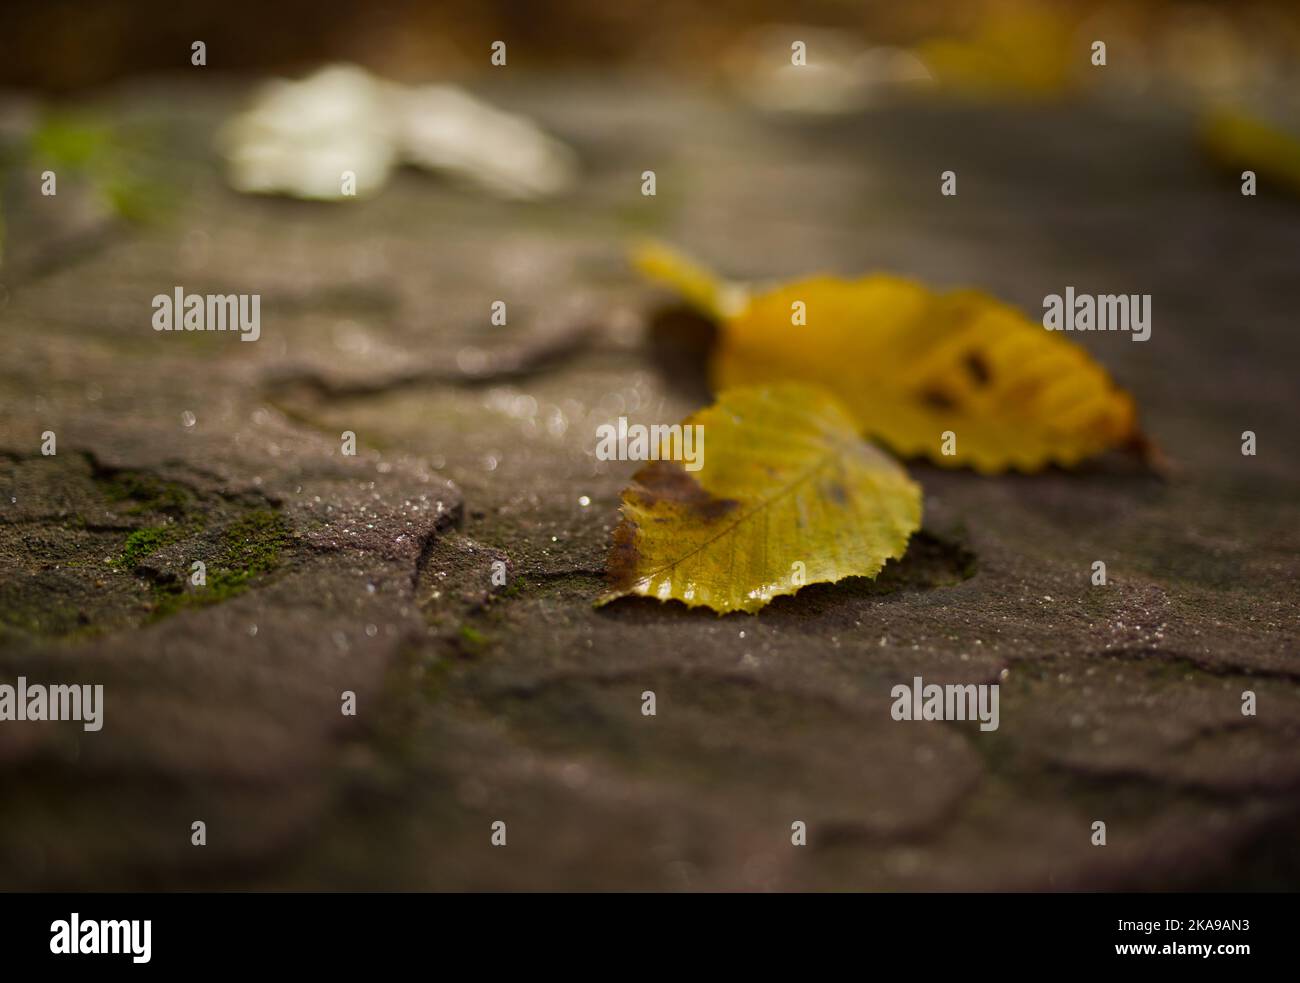 close-up perspective at a few fallen yellow leaves on a stony surface in early autumn Stock Photo